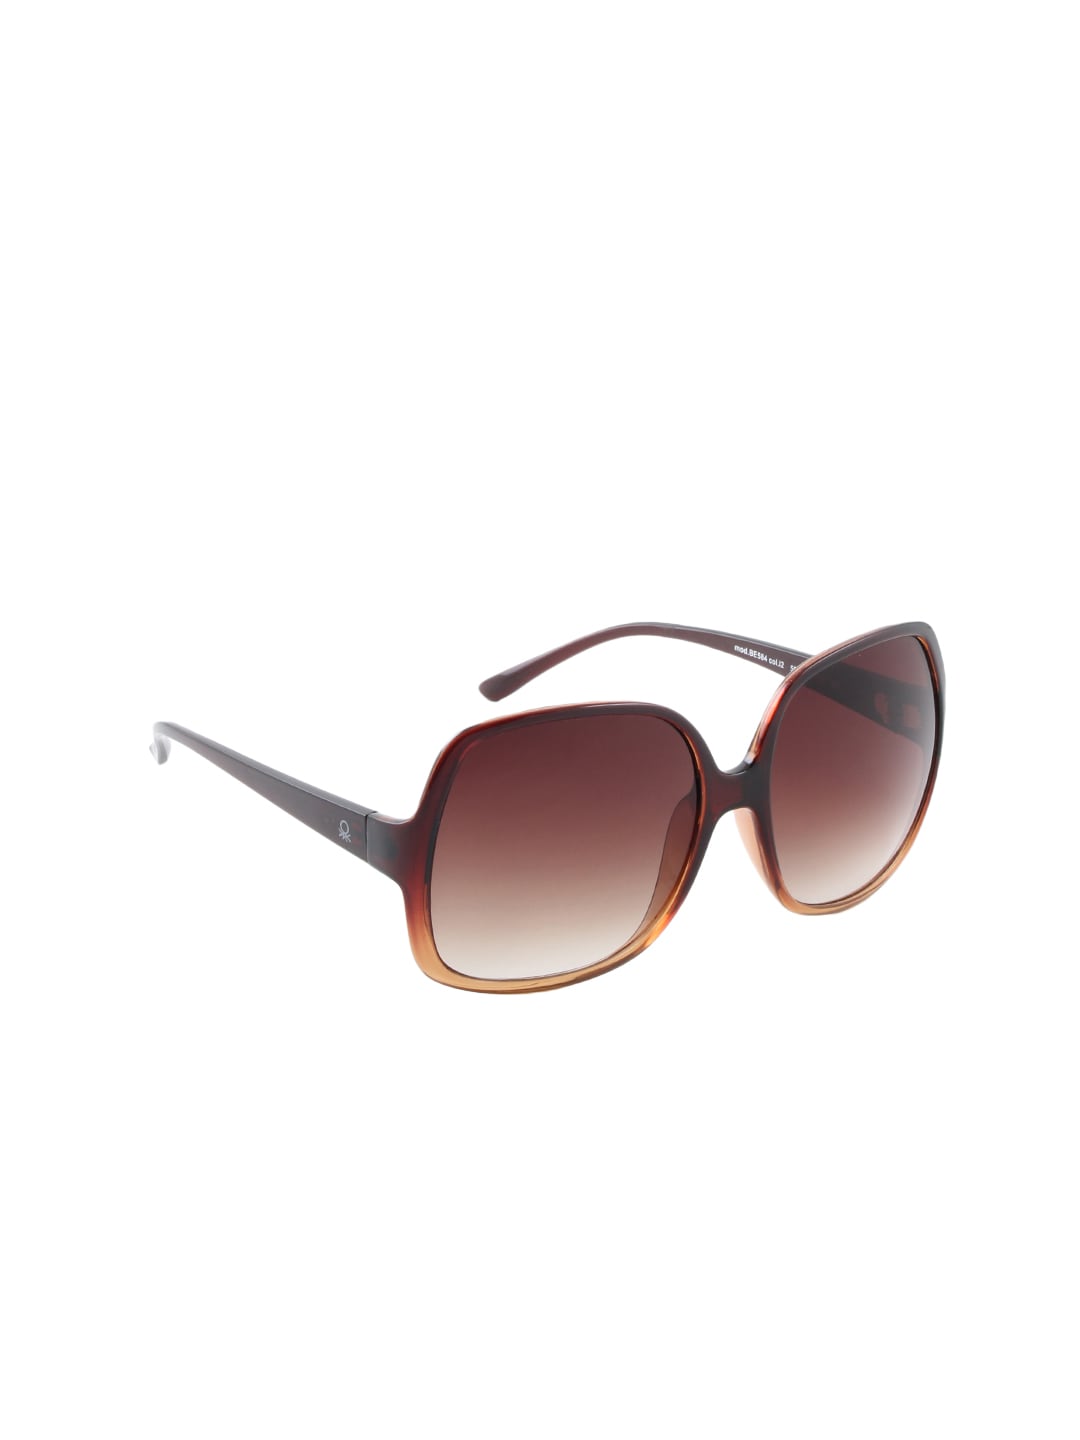 United Colors of Benetton Women Brown Sunglass